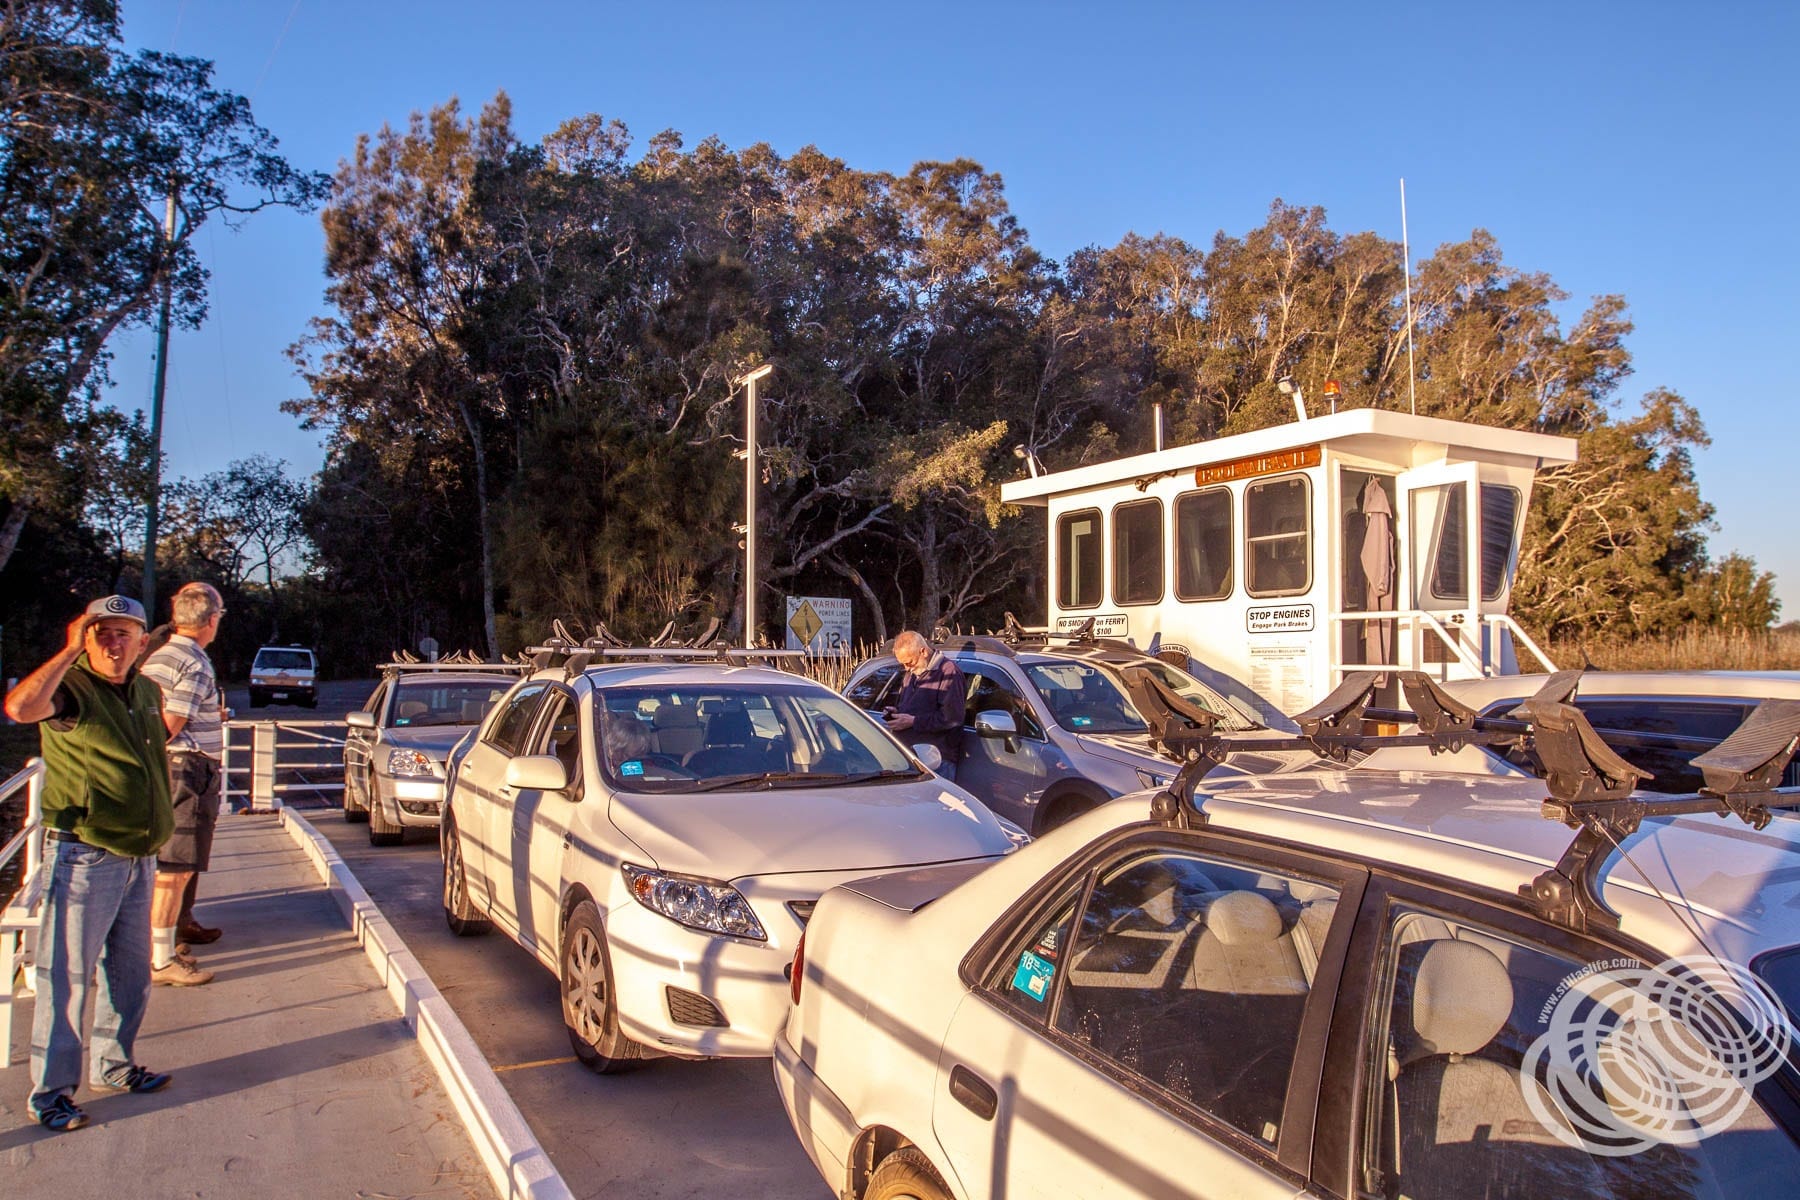 The Bombah Point Ferry carries 6 cars